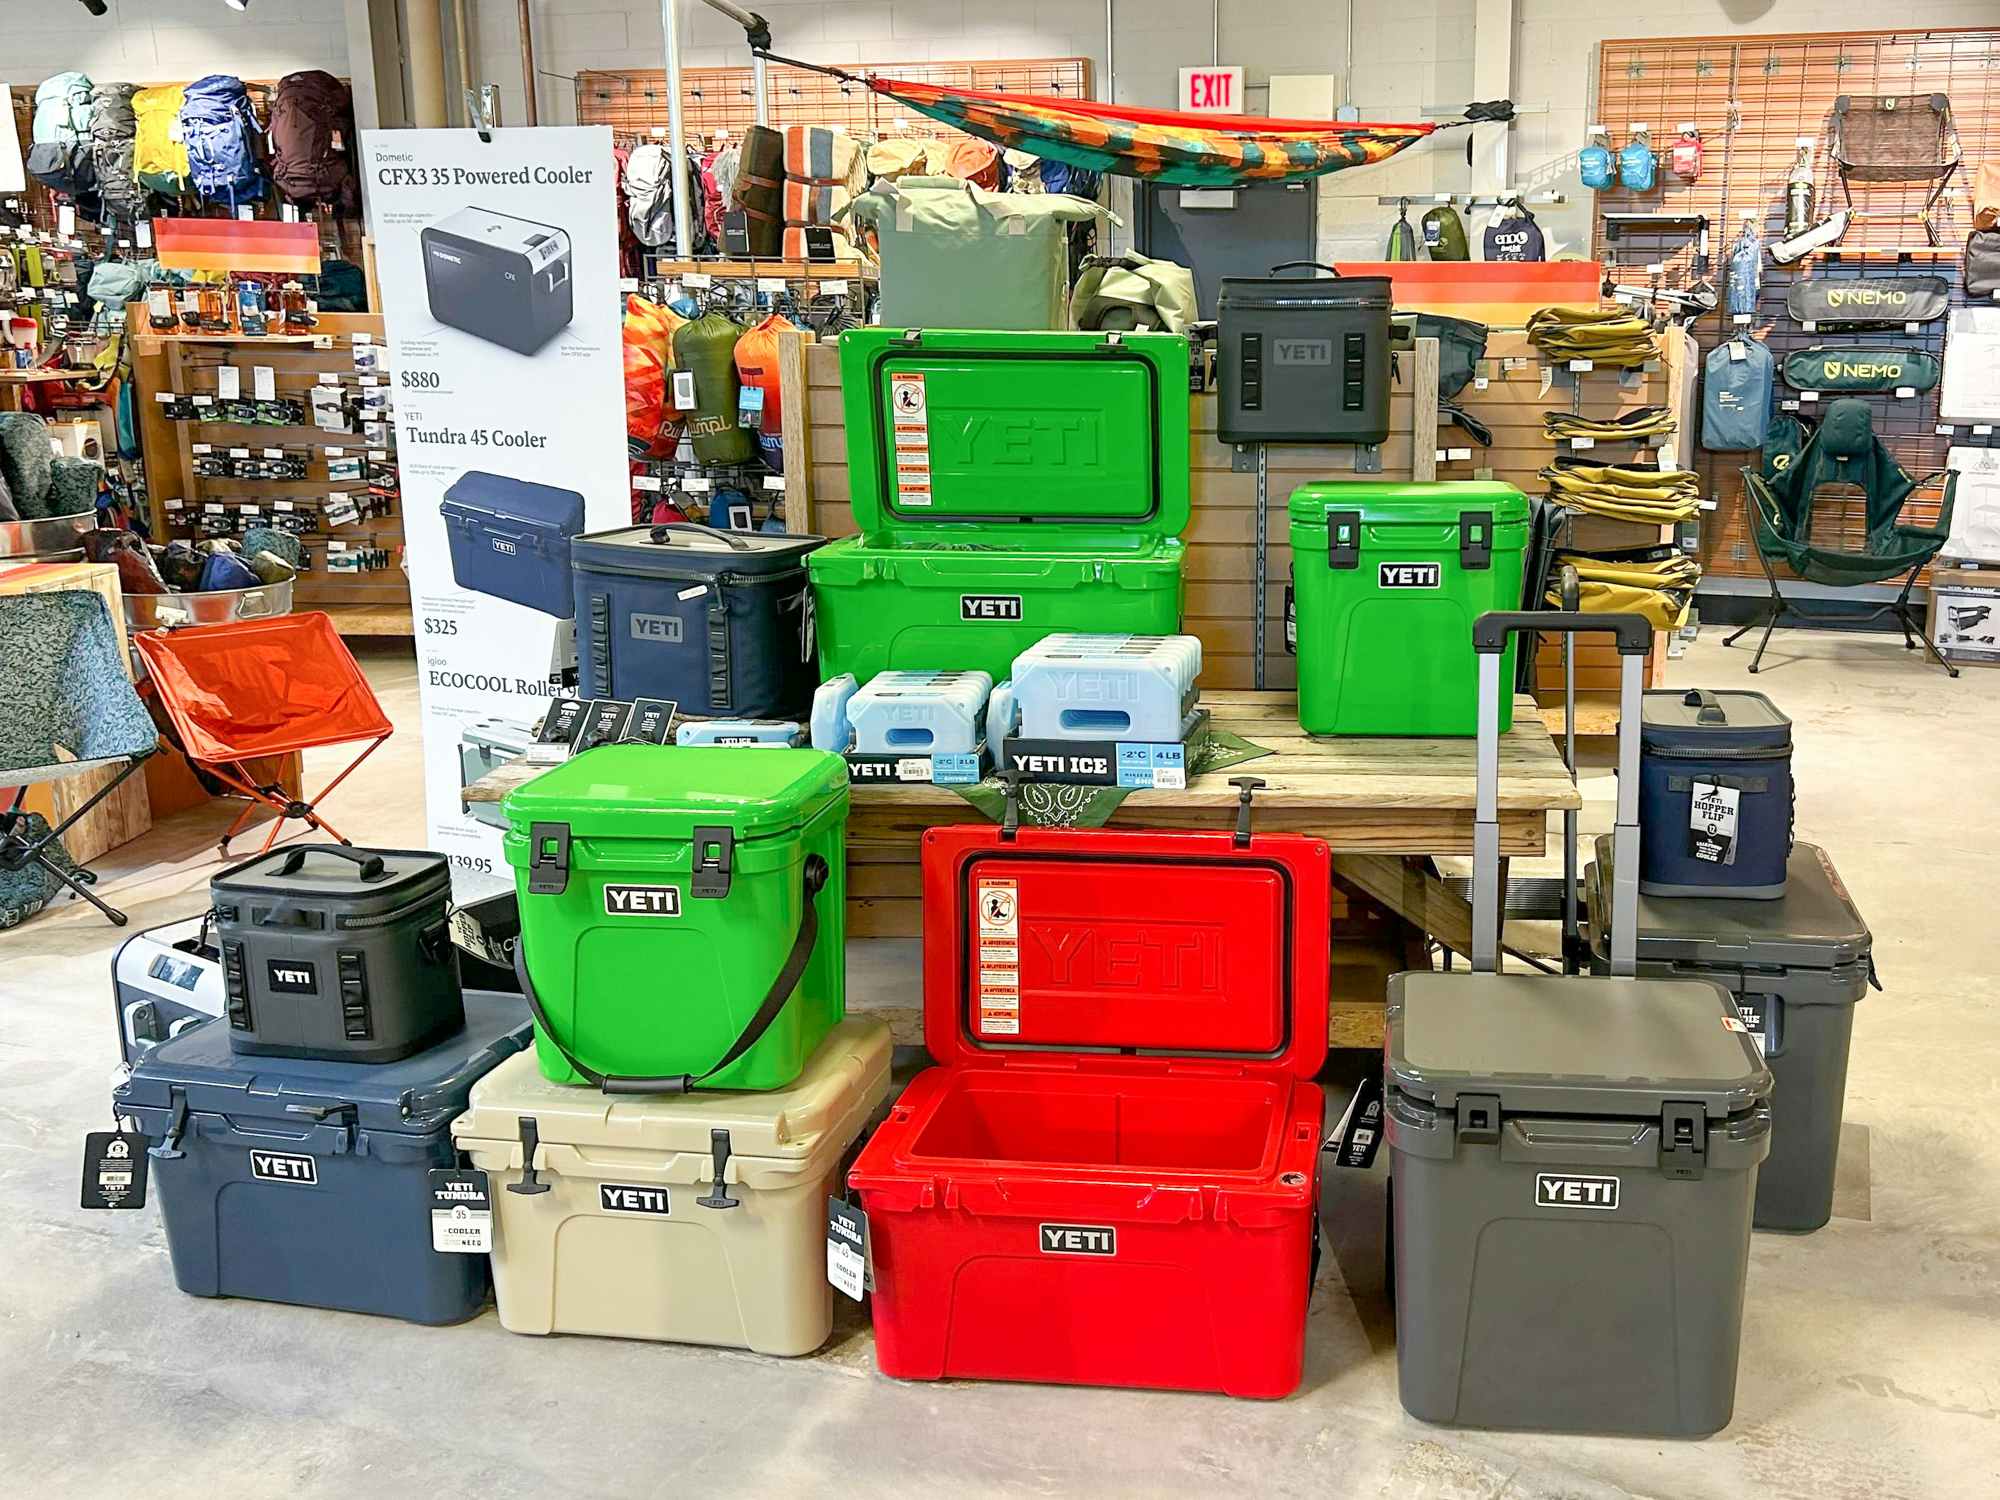 Yeti Coolers Sale - Yeti Clearance Outlet Online - Yeti Outlet Store